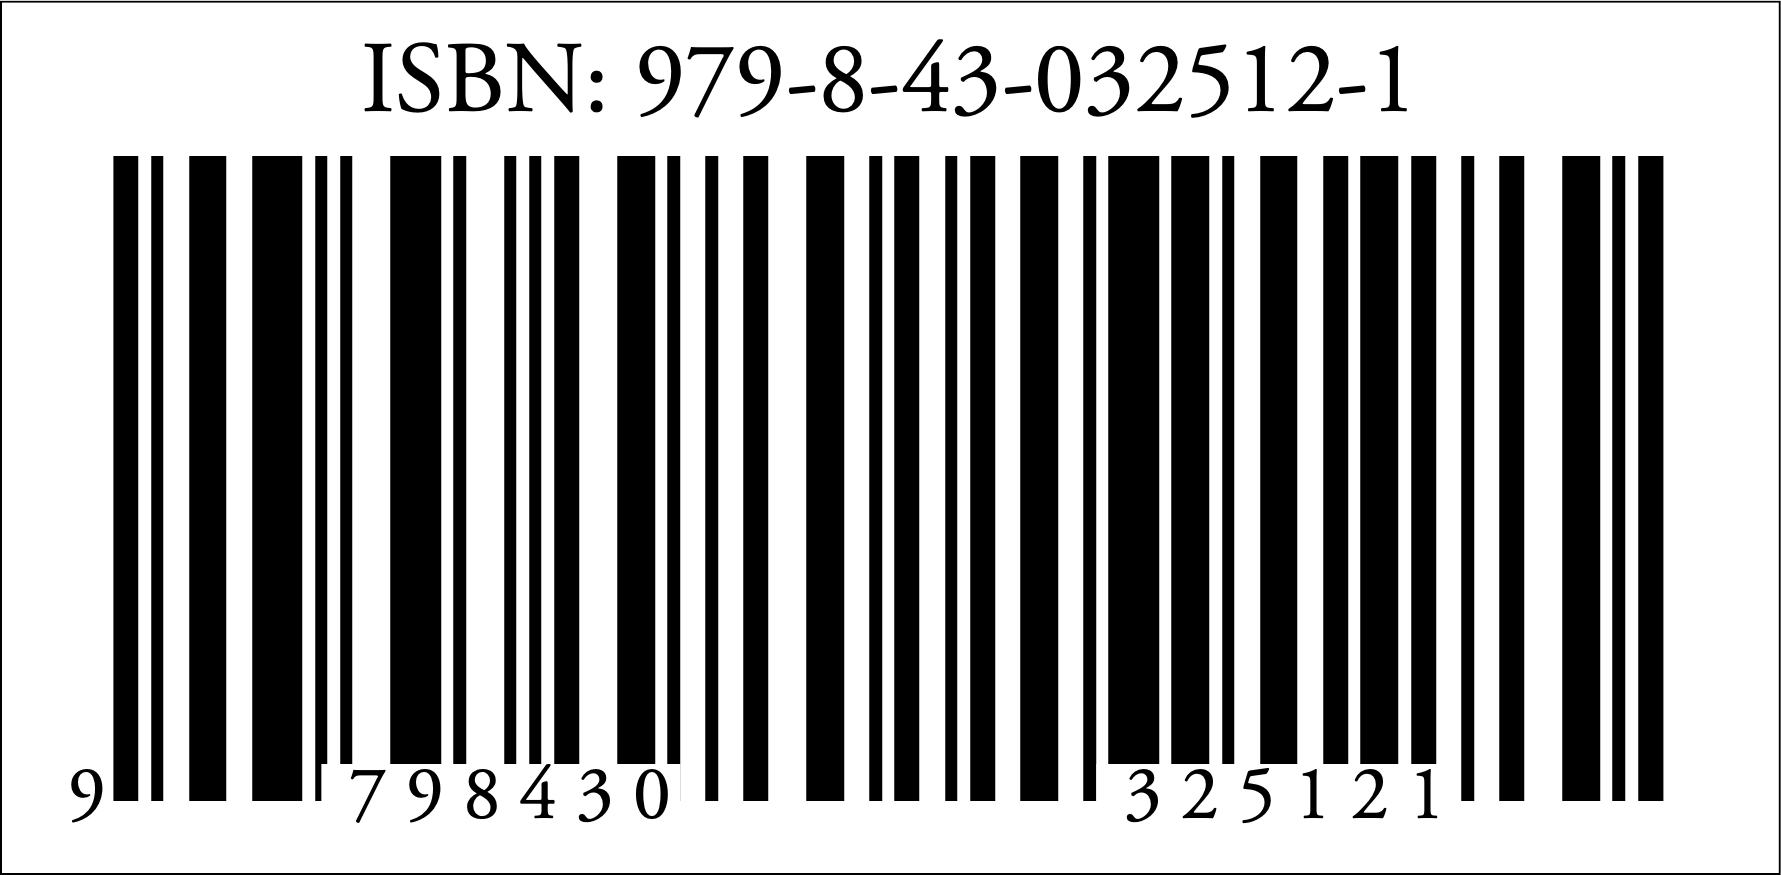 Southern Living Index ISBN: A Swift-generated ISBN for 979-8-43-032512-1 for the Unofficial Index to the Southern Living Cookbook Library.; barcodes; ISBN